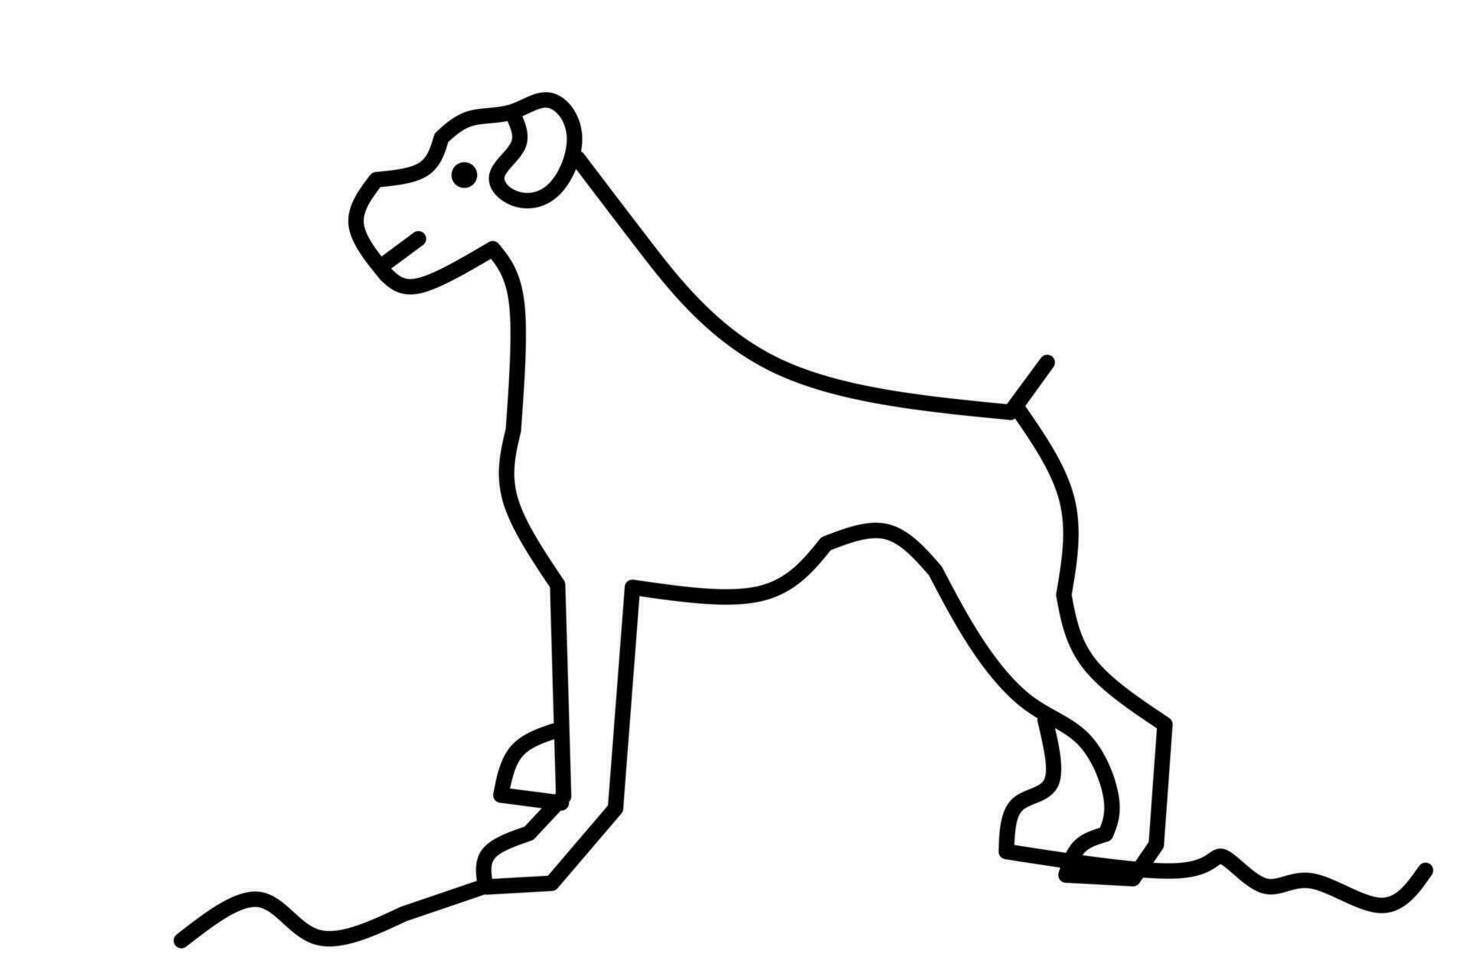 dog line drawing isolated on white background. vector illustration.